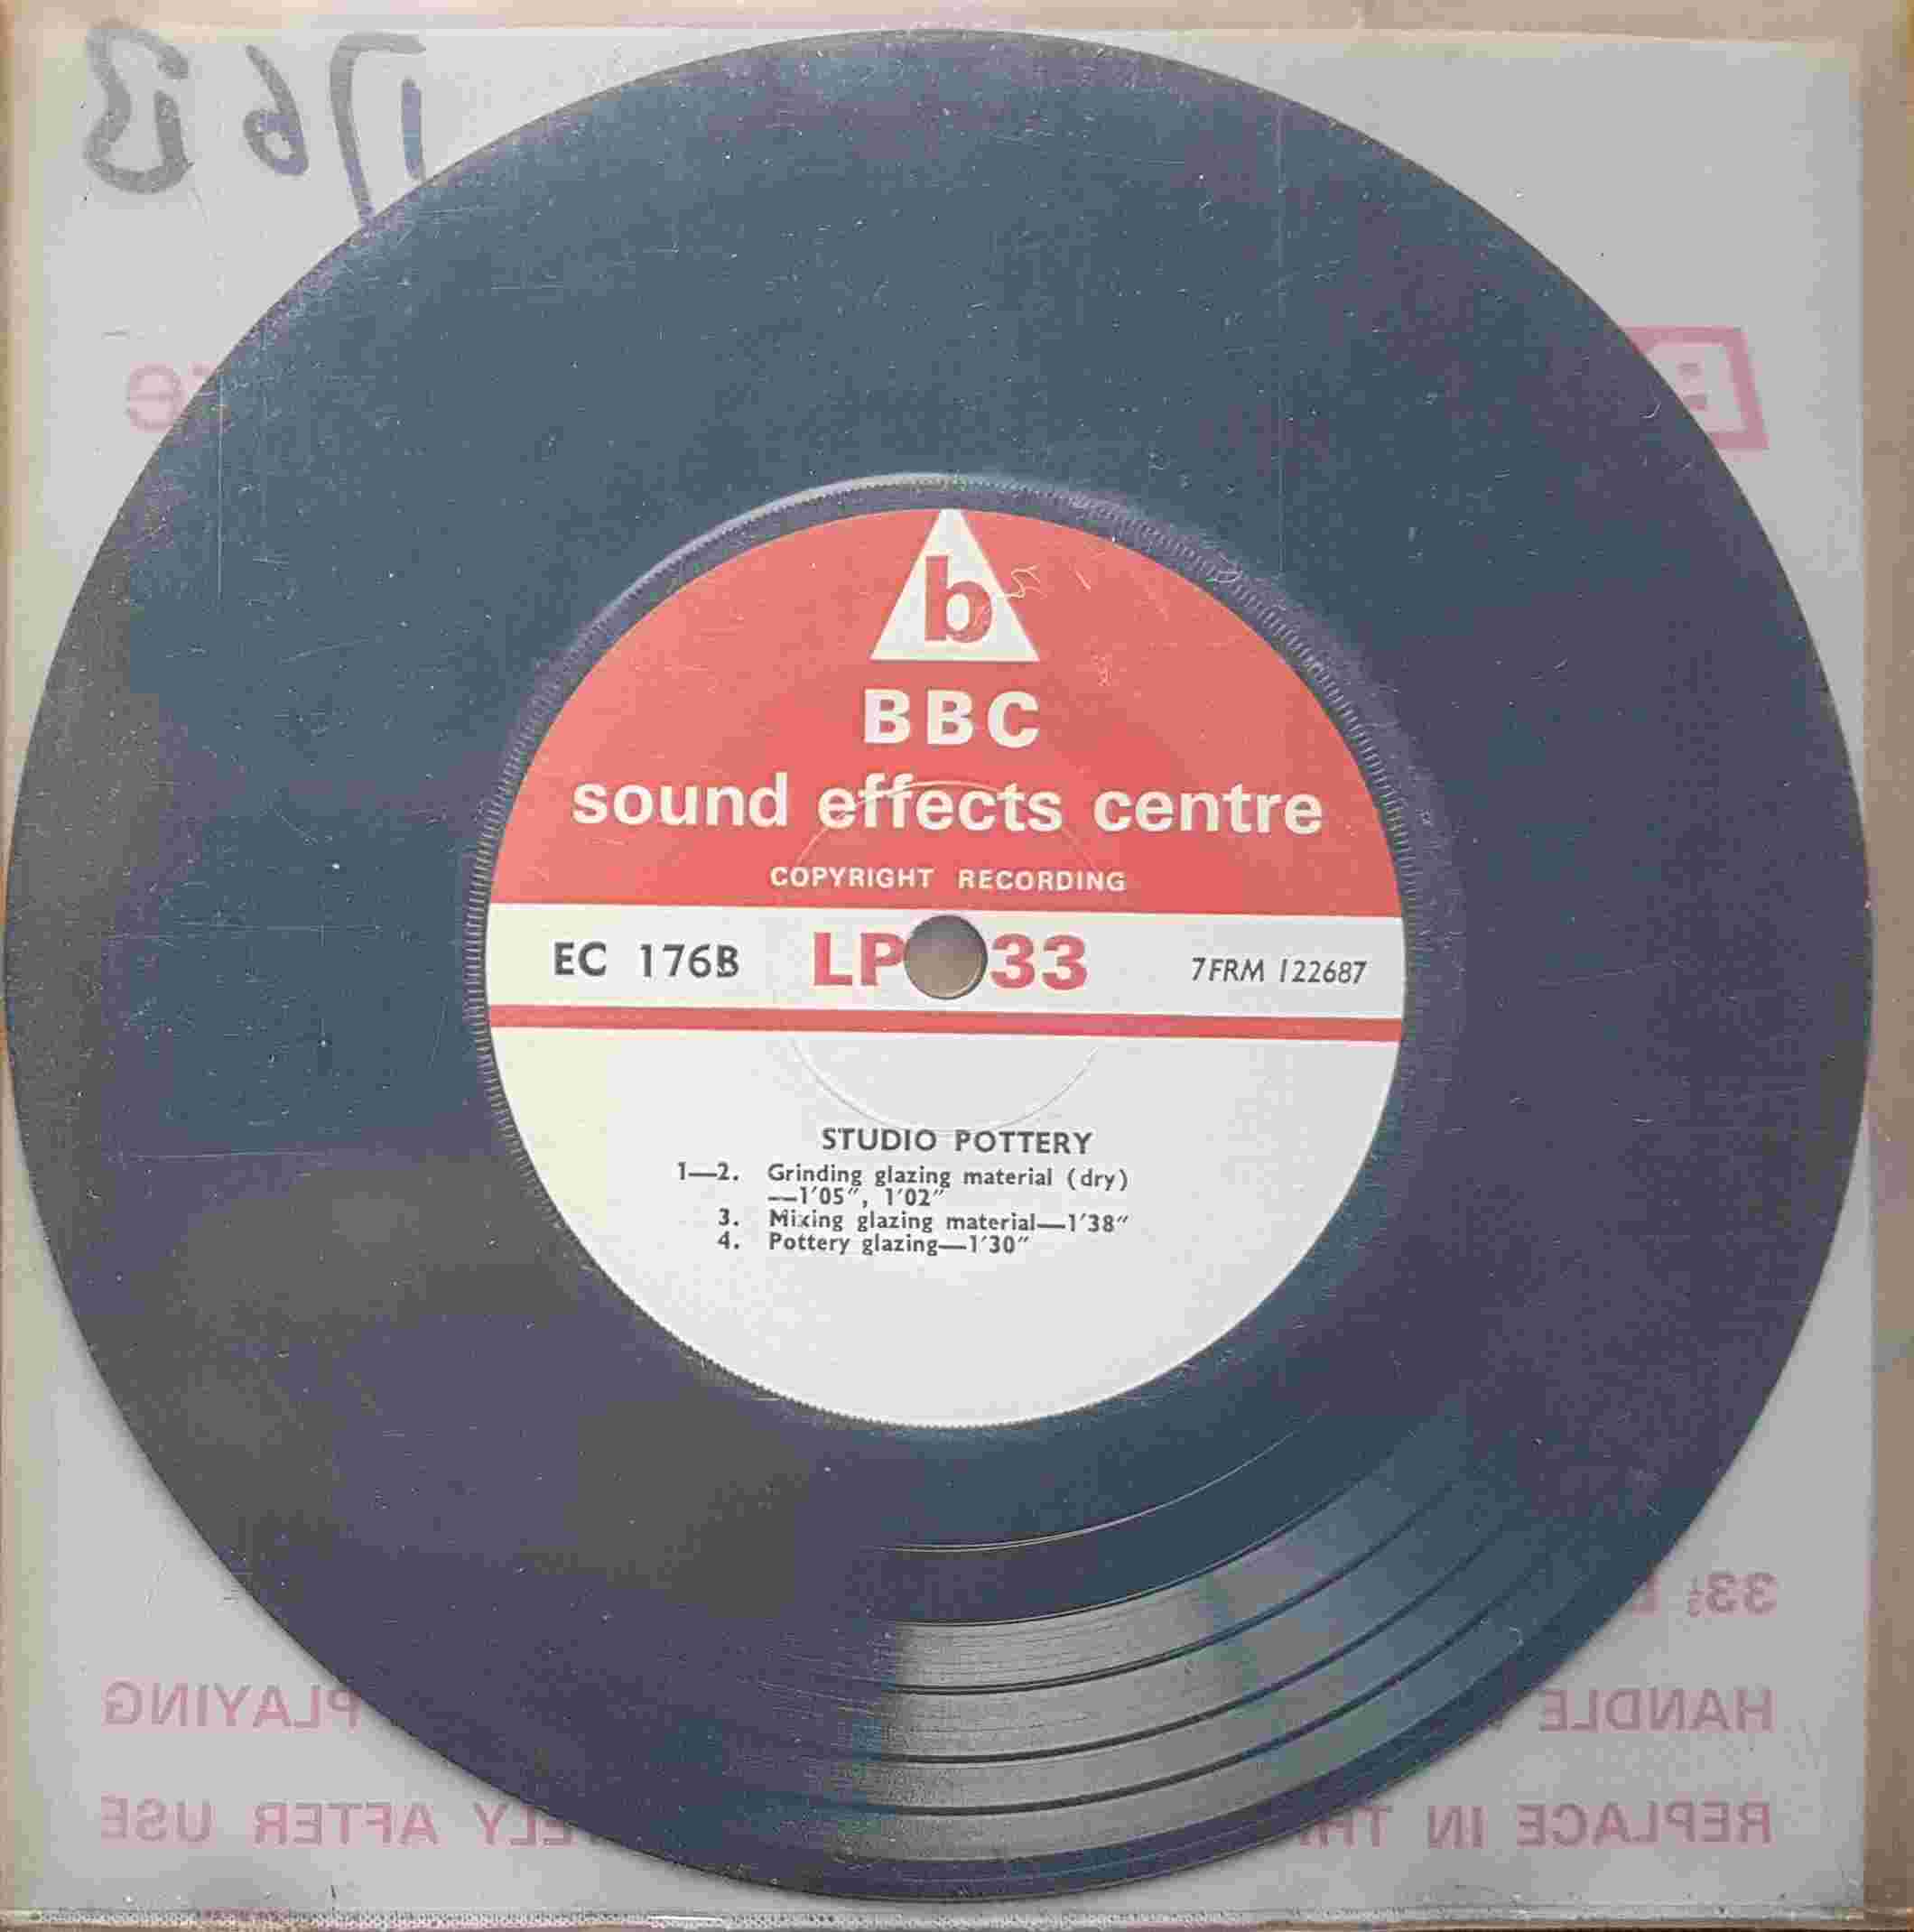 Picture of EC 176B Studio pottery by artist Not registered from the BBC records and Tapes library